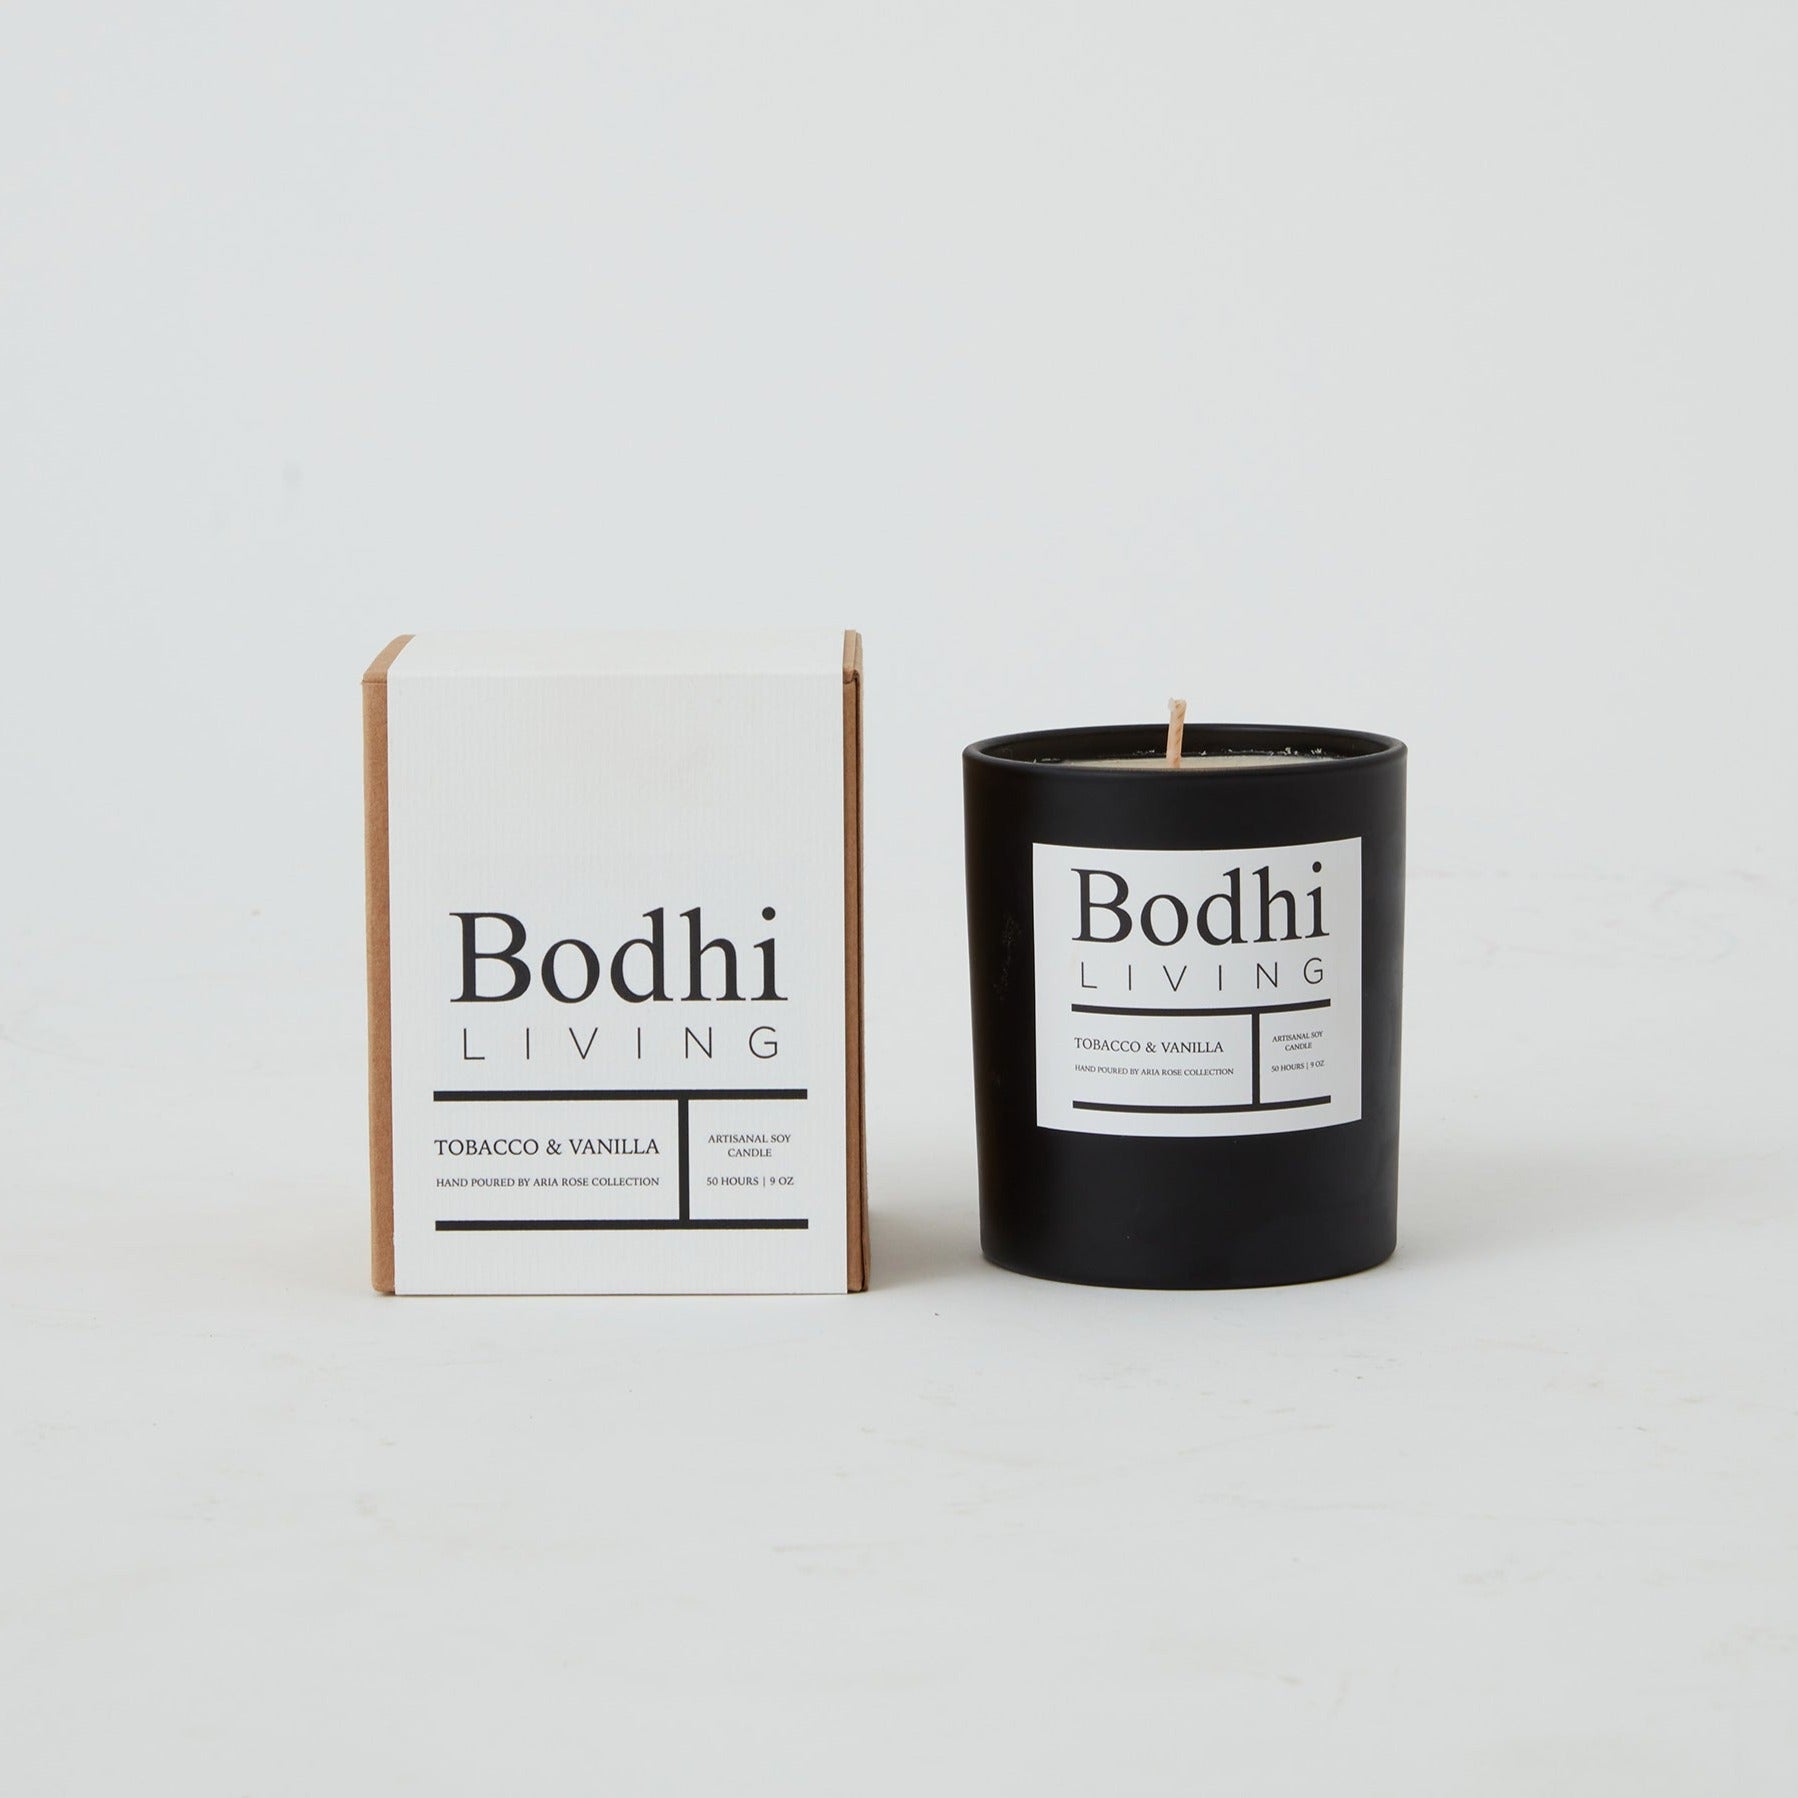 Artisanal soy candle in amber jar - Tabacco & Vanilla